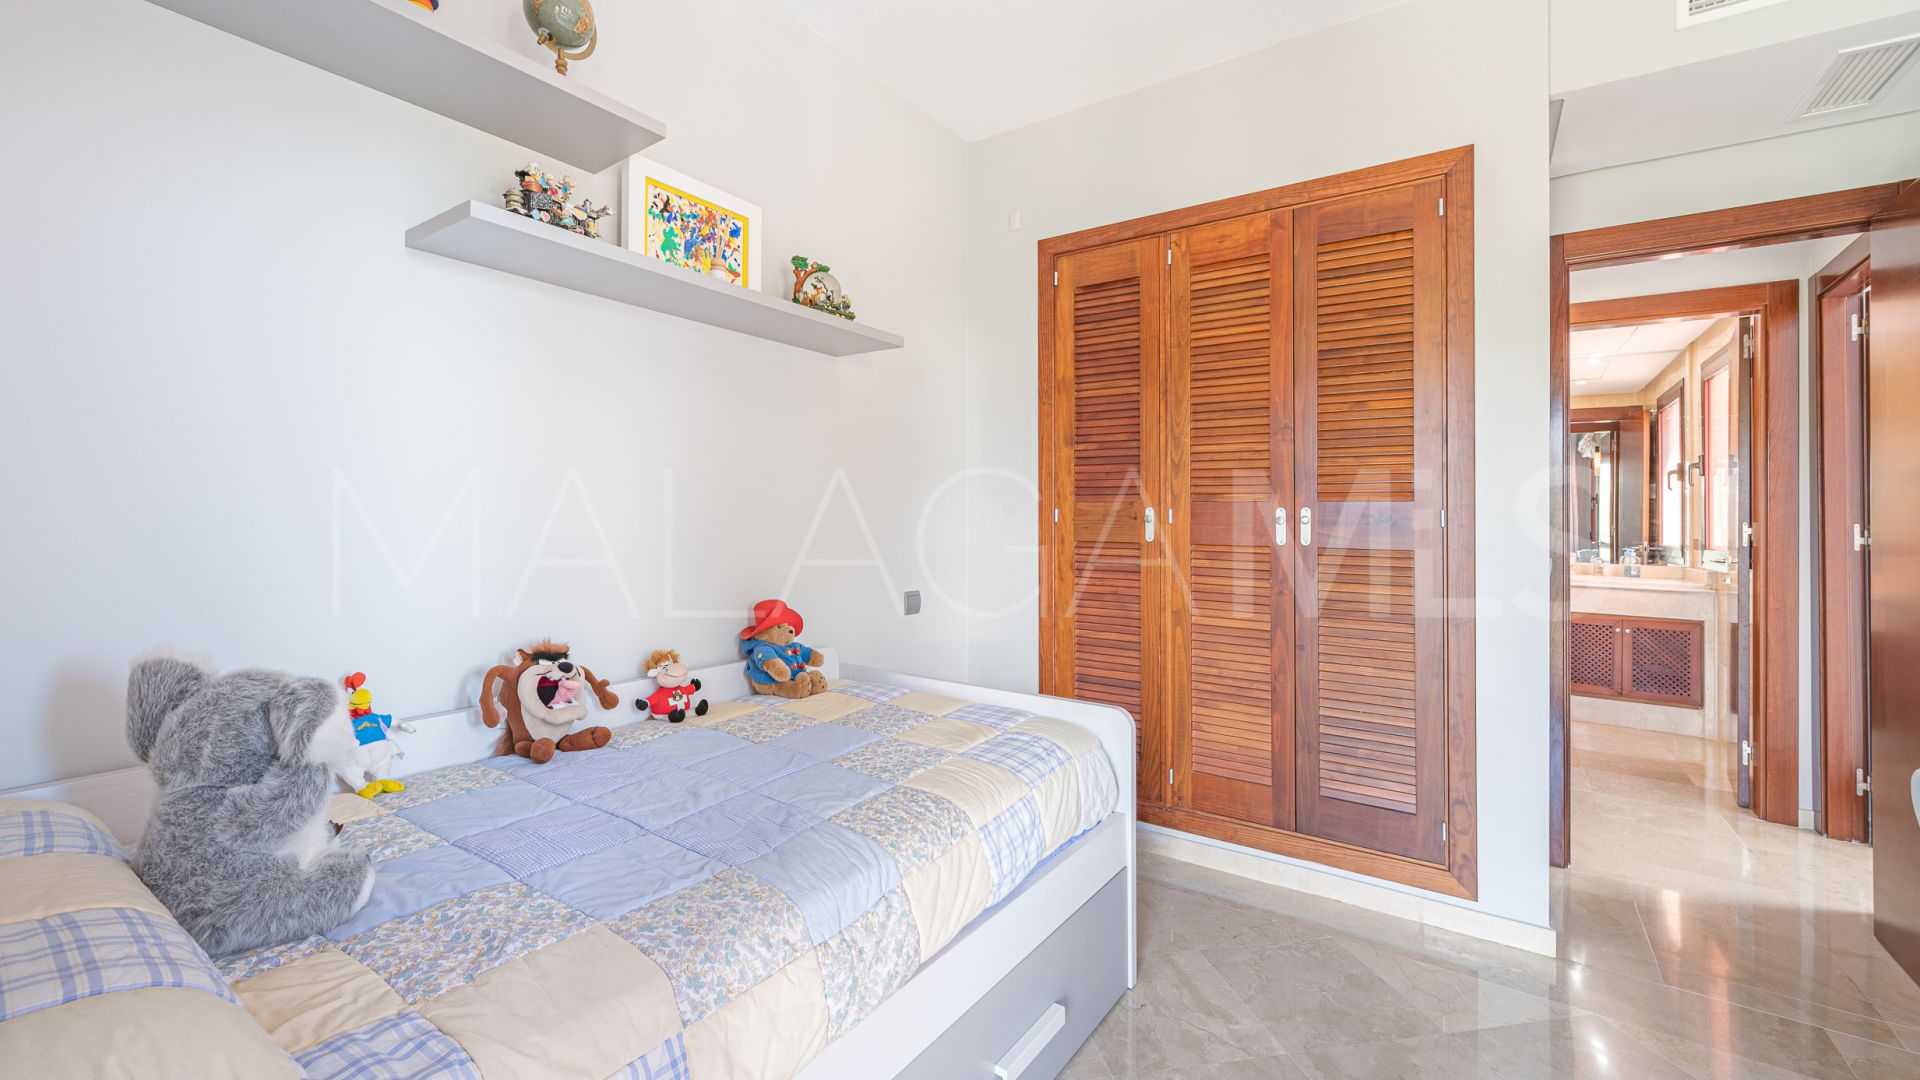 Atico for sale in Alicate Playa with 4 bedrooms